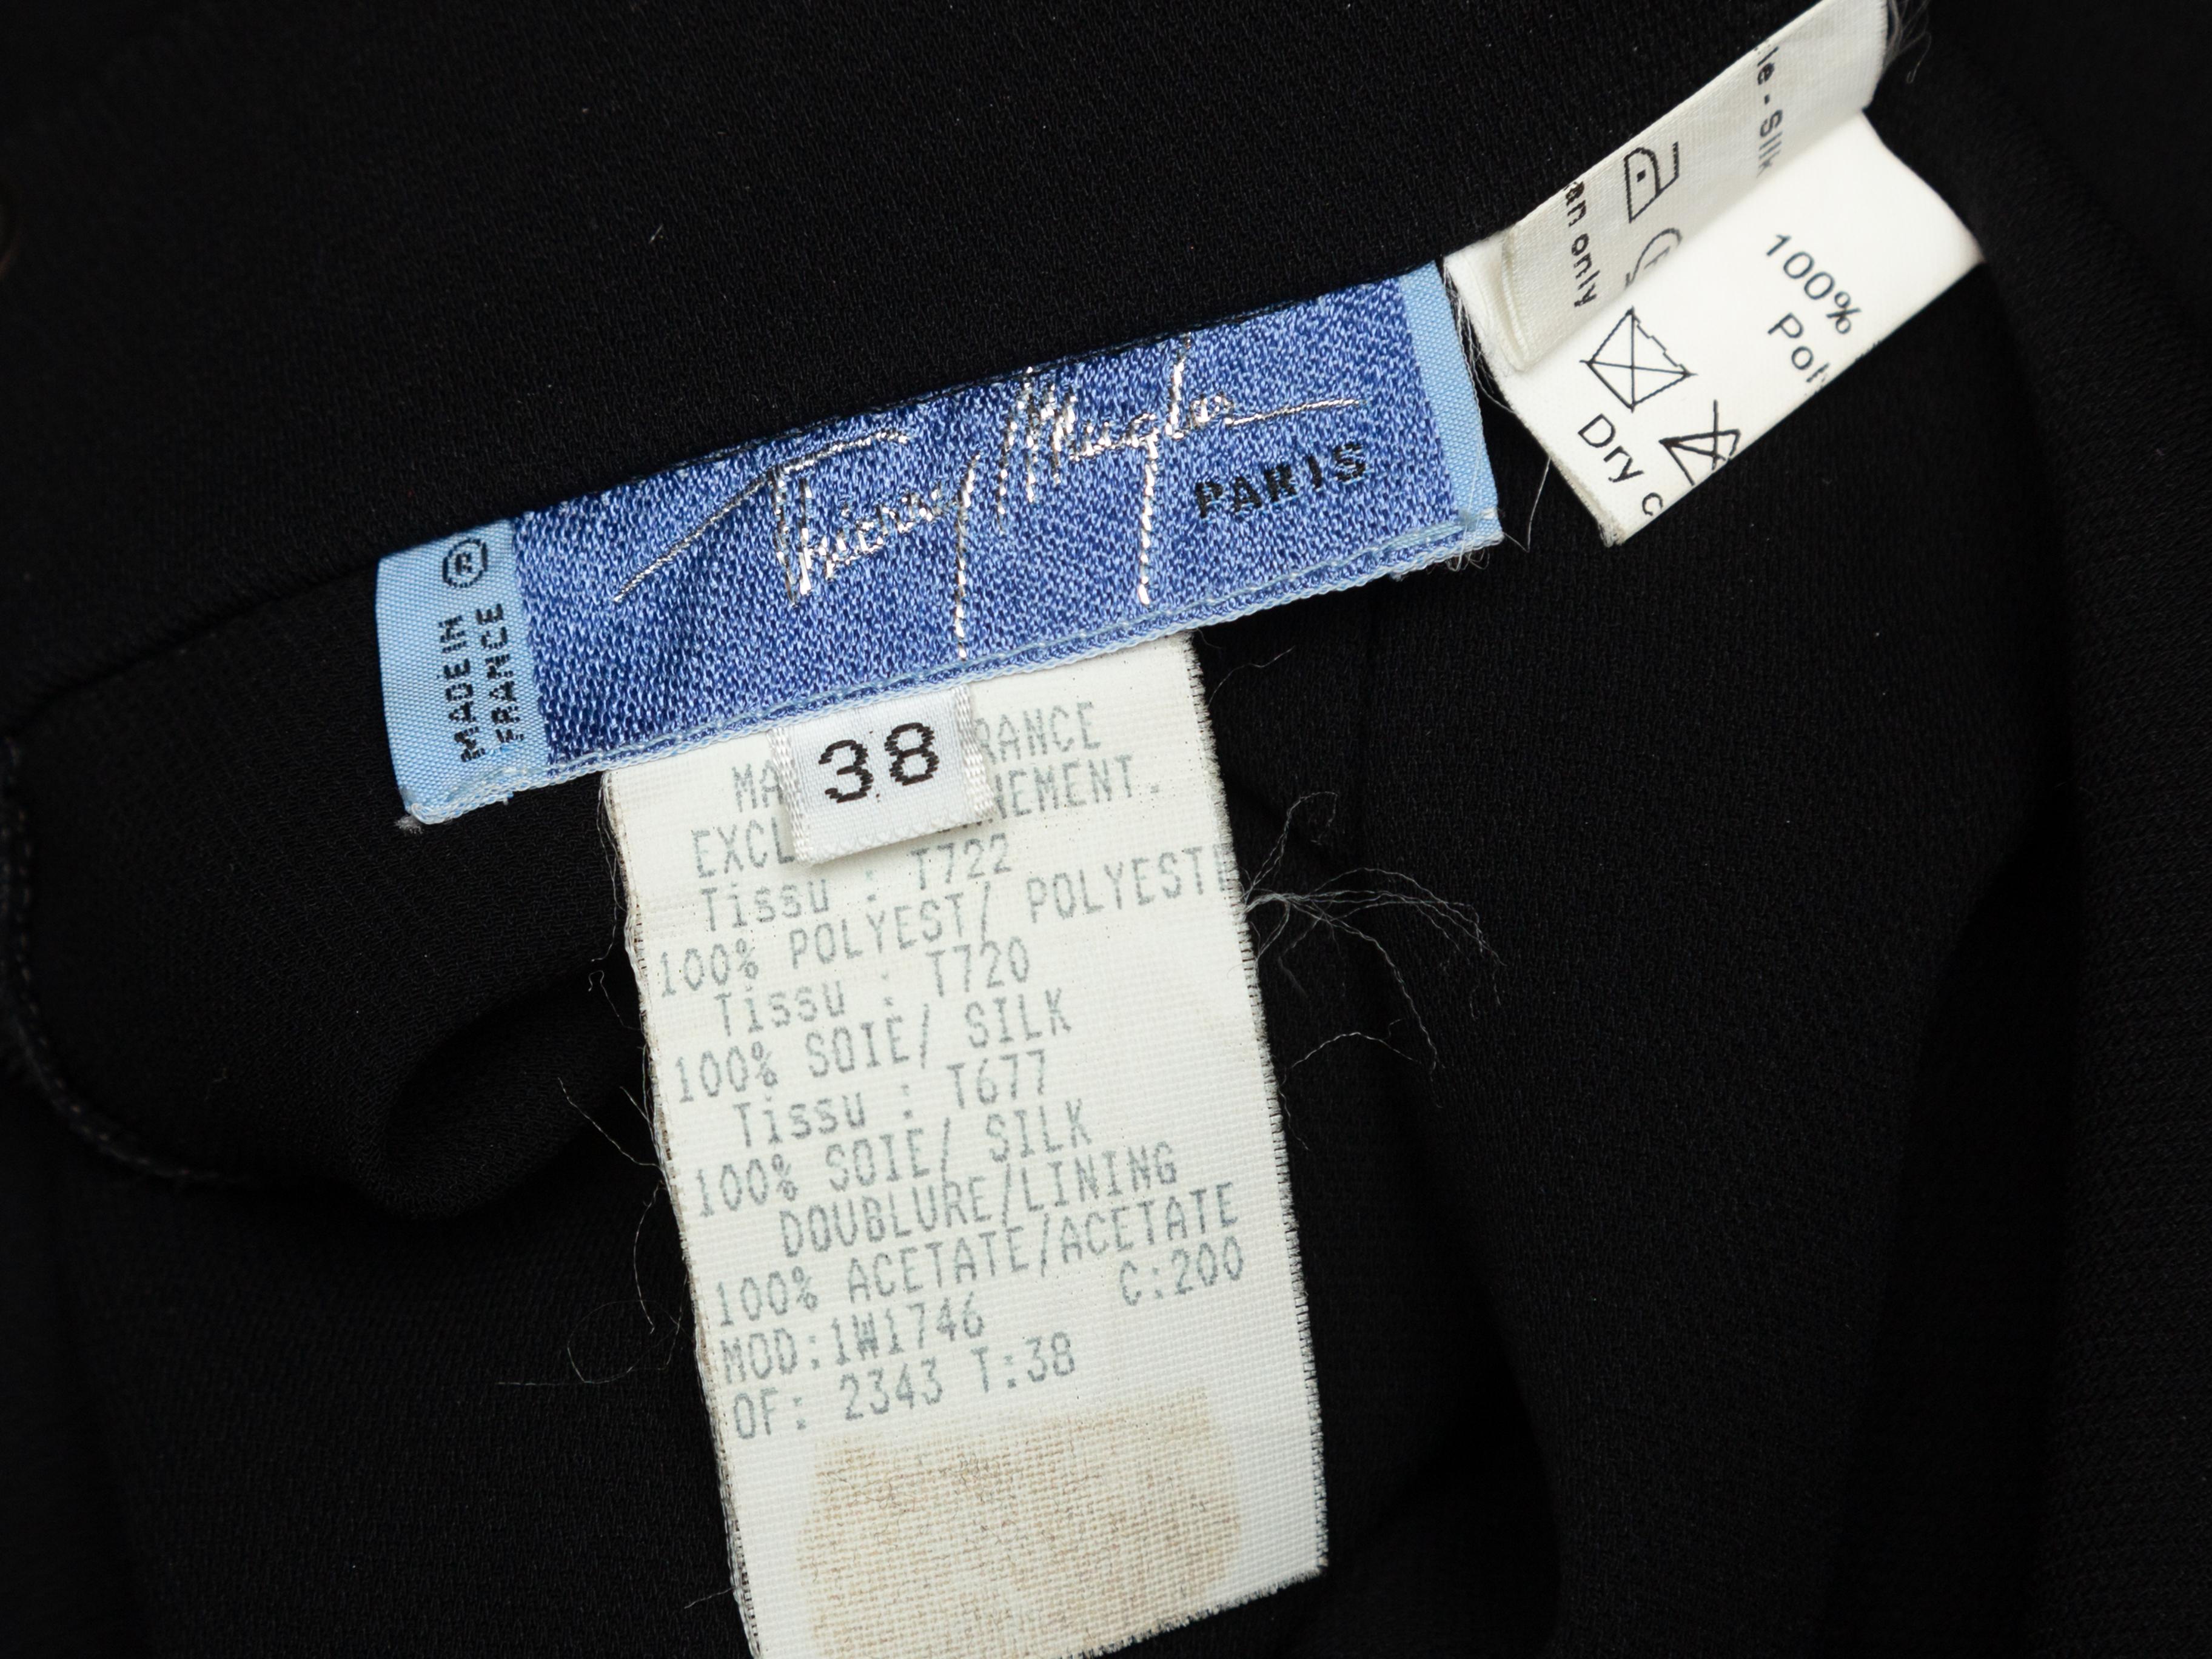 Product details: Vintage black open side pants by Thierry Mugler. Zip and button closures at front. Designer size 38. 24